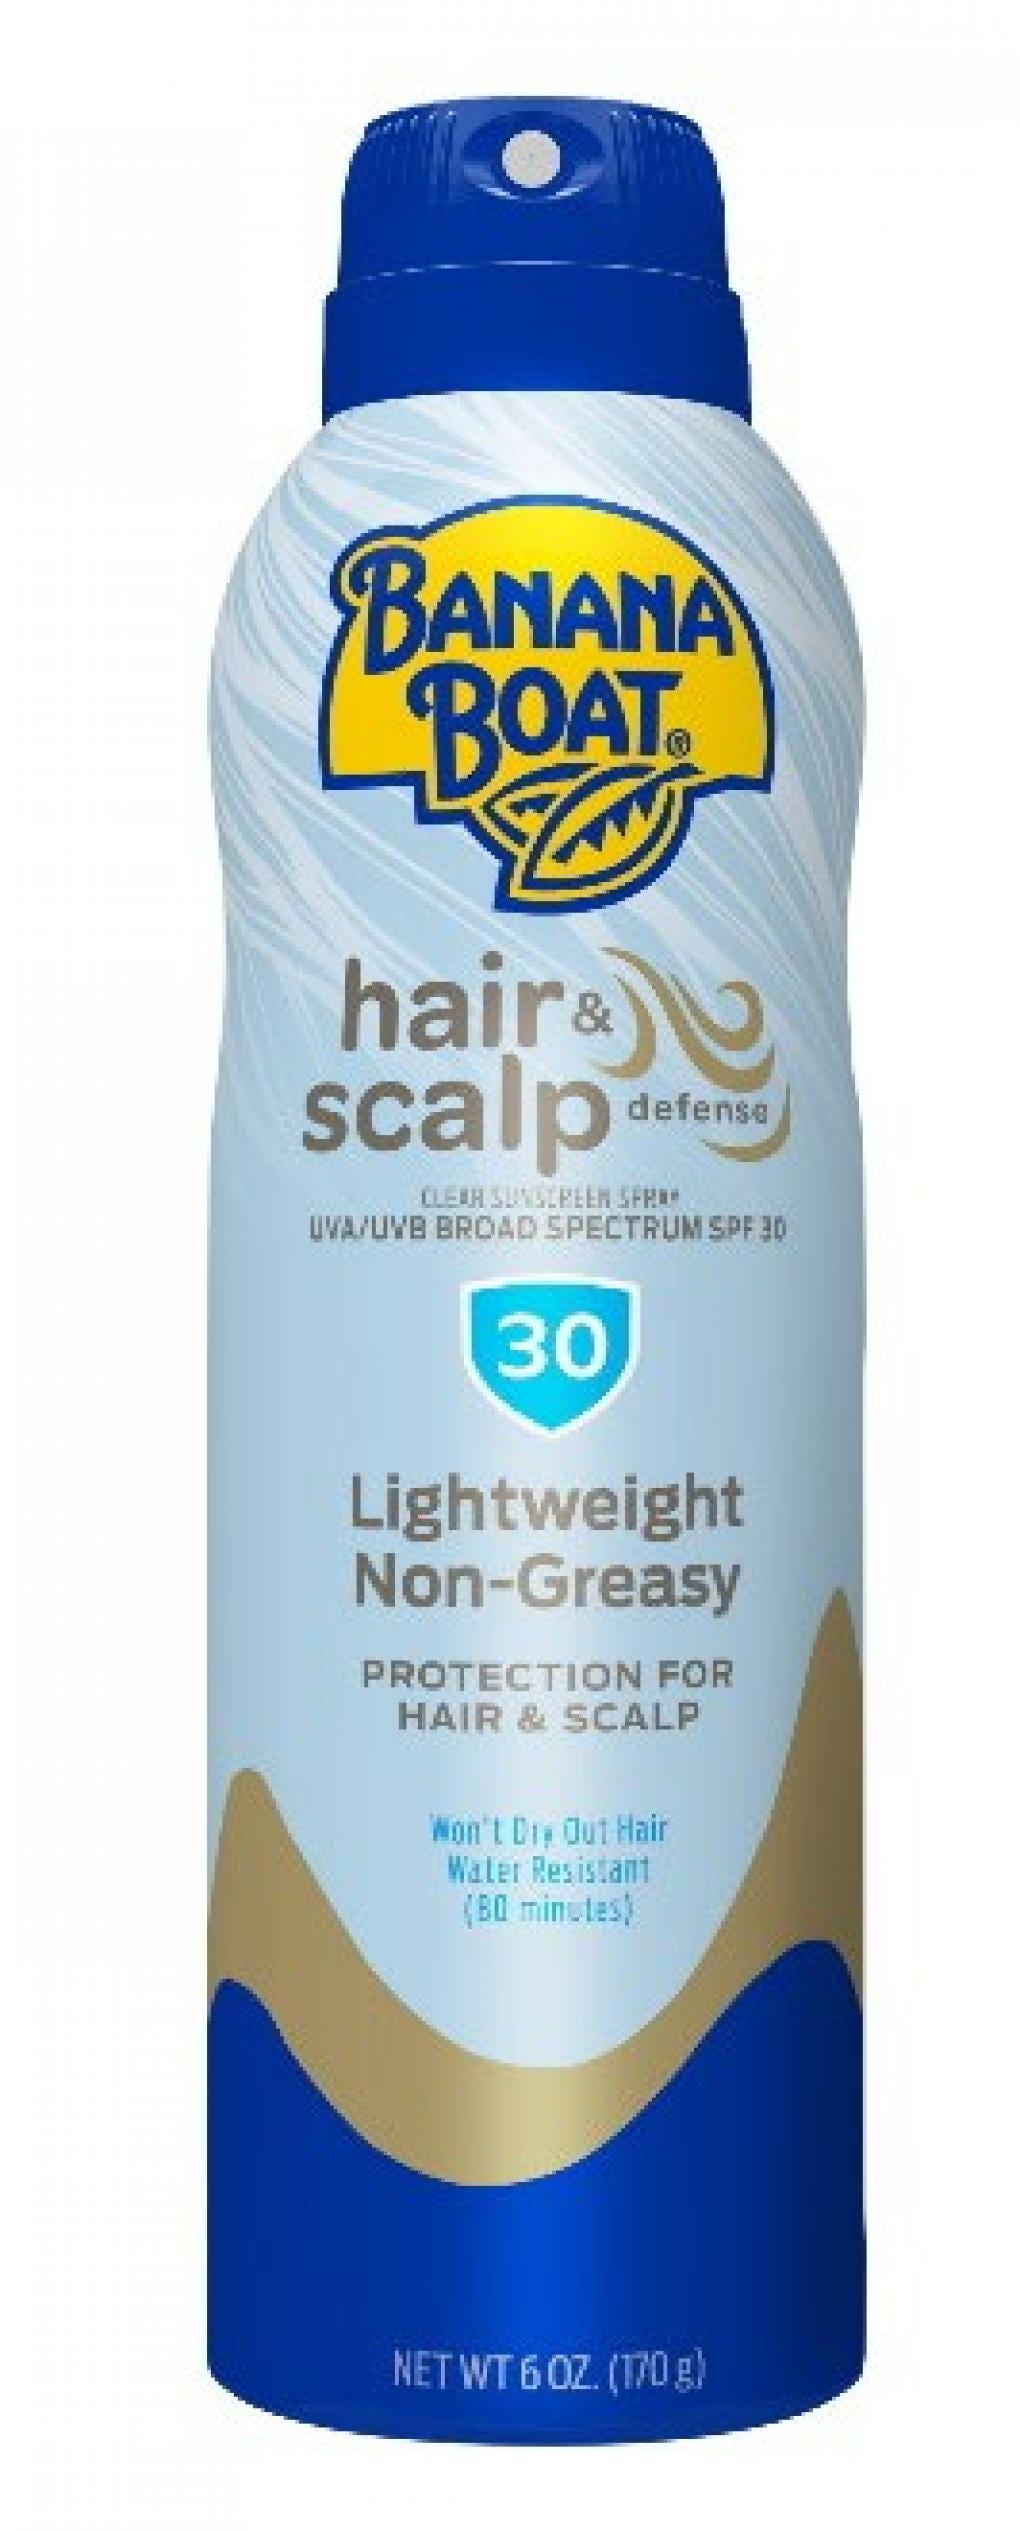 Banana Boat expands sunscreen spray recall over cancer-causing chemical benzene